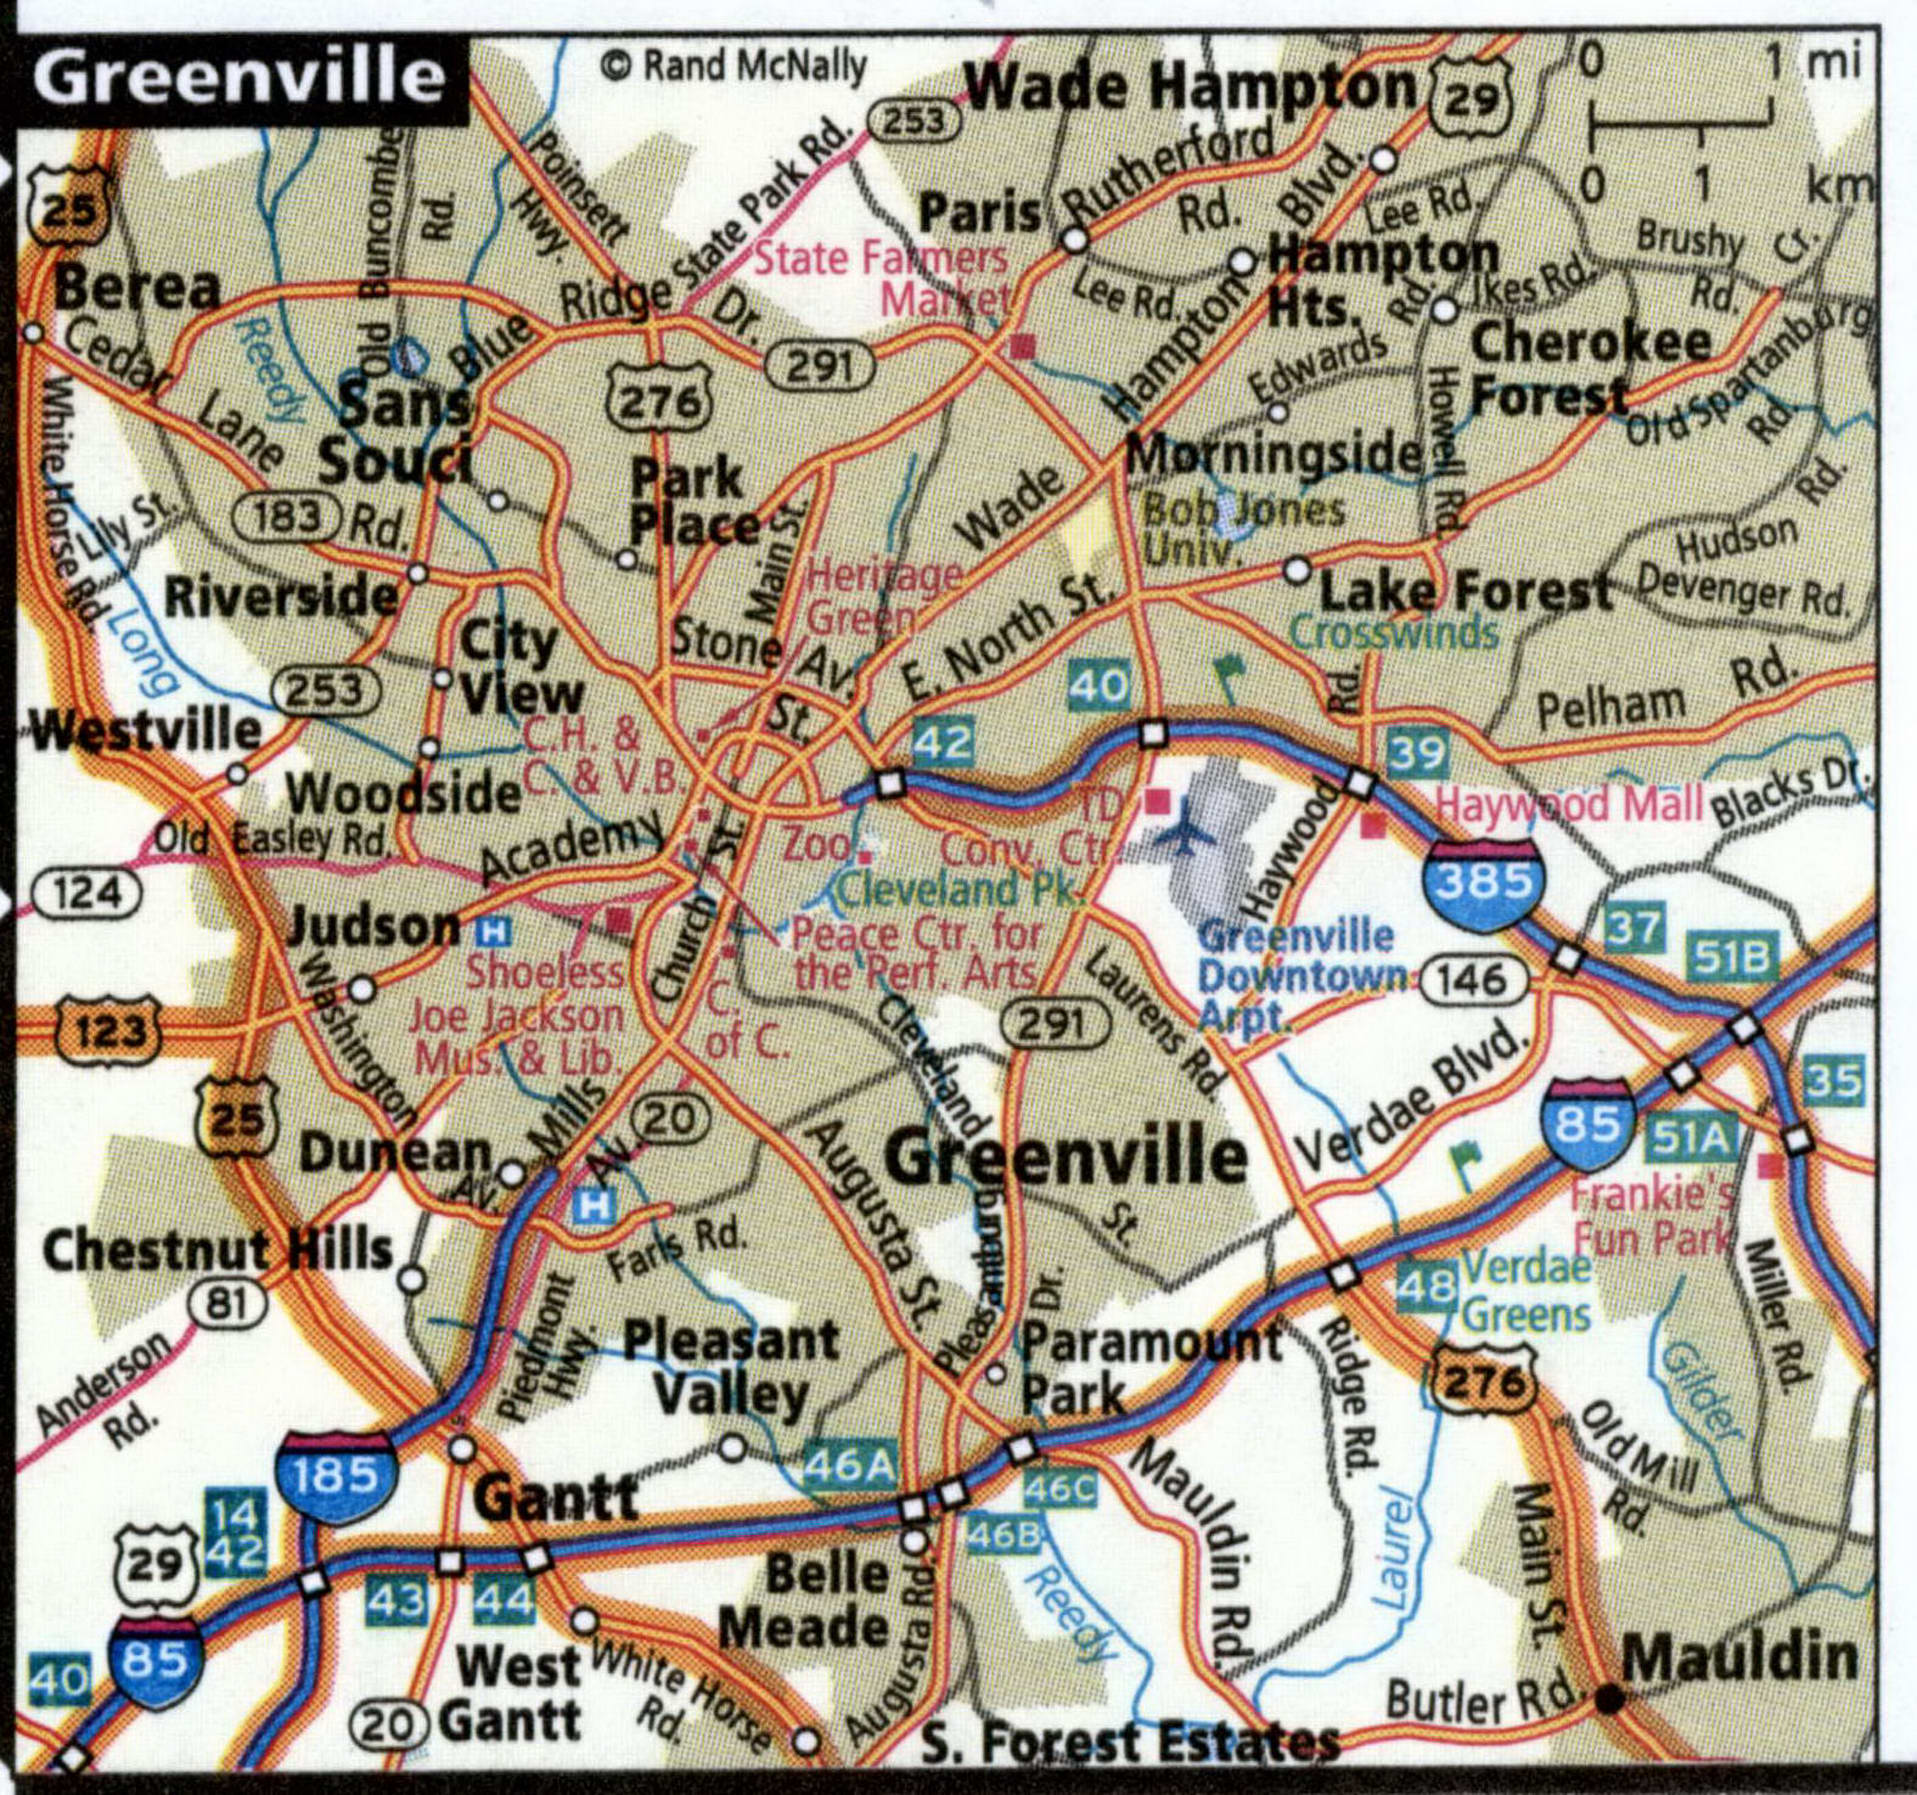 Greenville city map for truckers